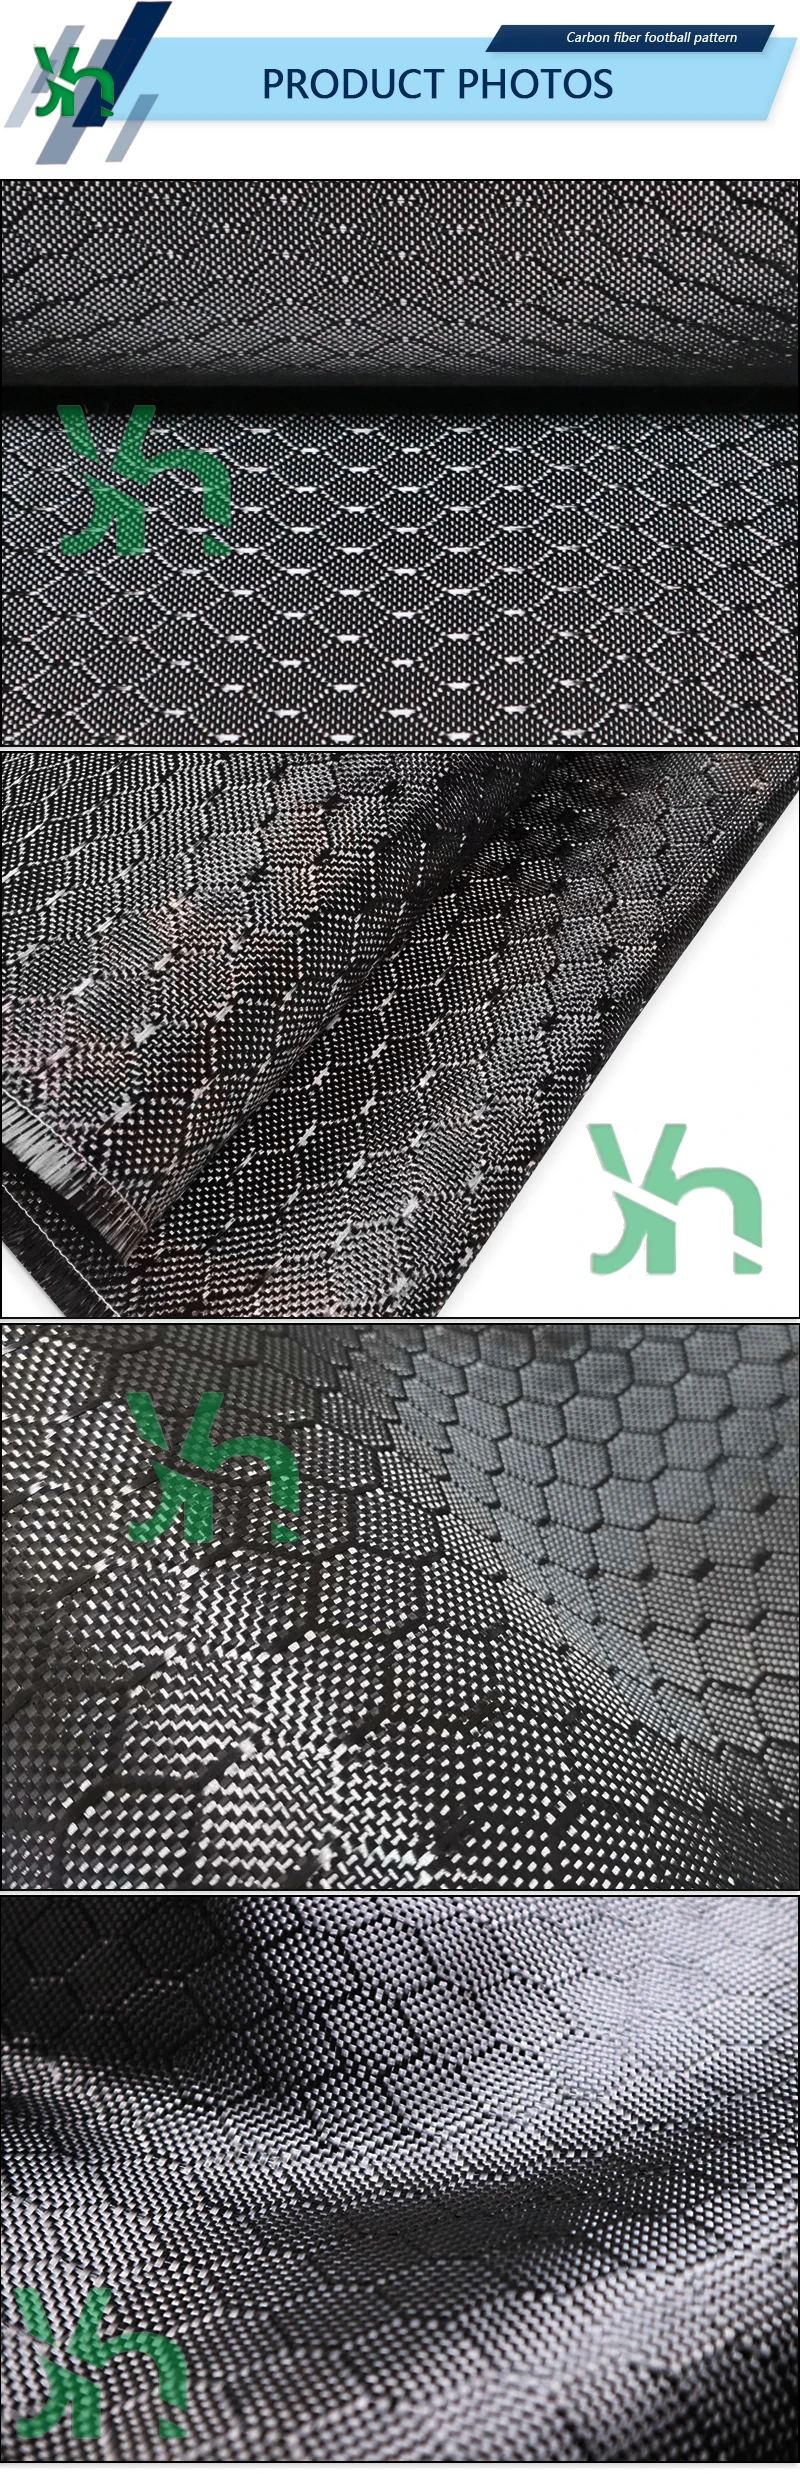 Outdoor Furniture luxury 3K240g black football pattern carbon fiber cloth, suitable for off-road vehicle shell, hood, trunk, rear throat and car modifica outdoor furniture cushions